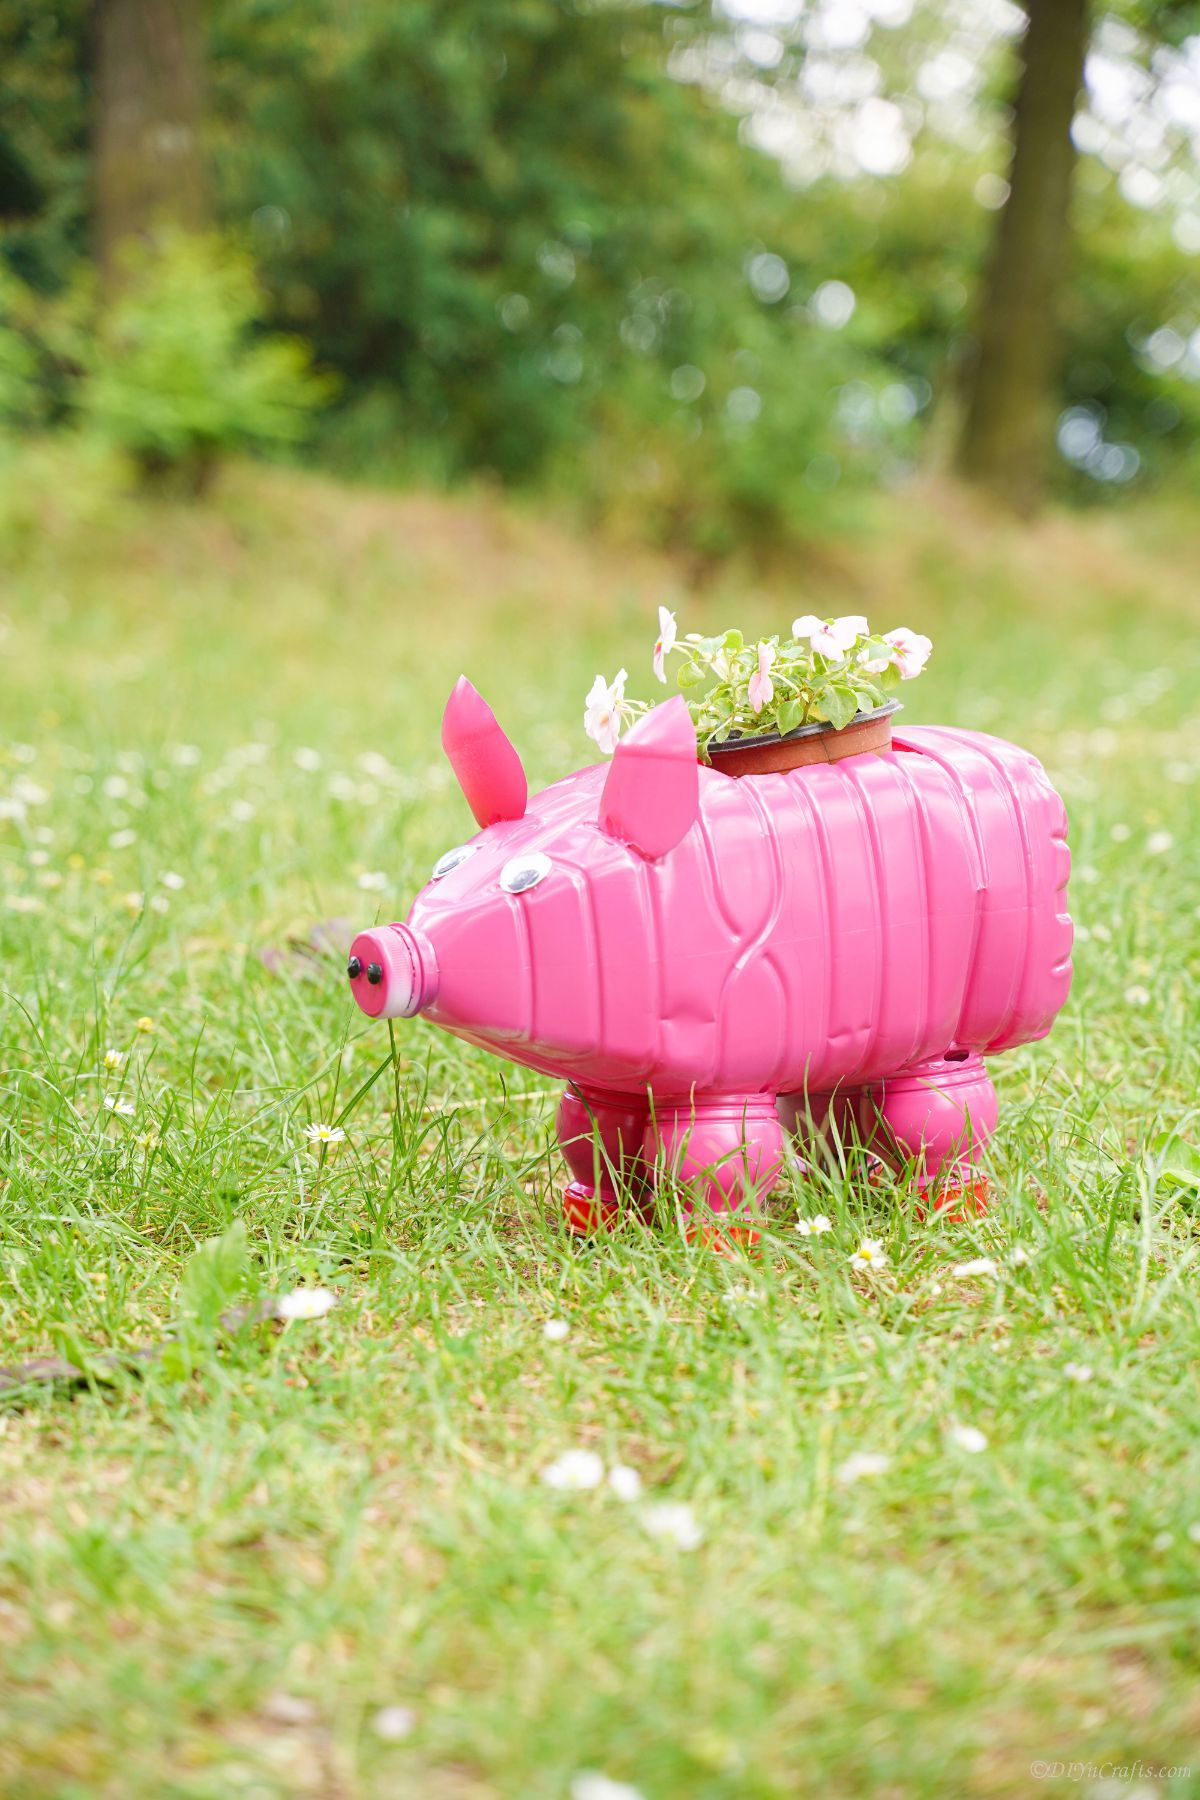 pink pig planter with white flowers n yard